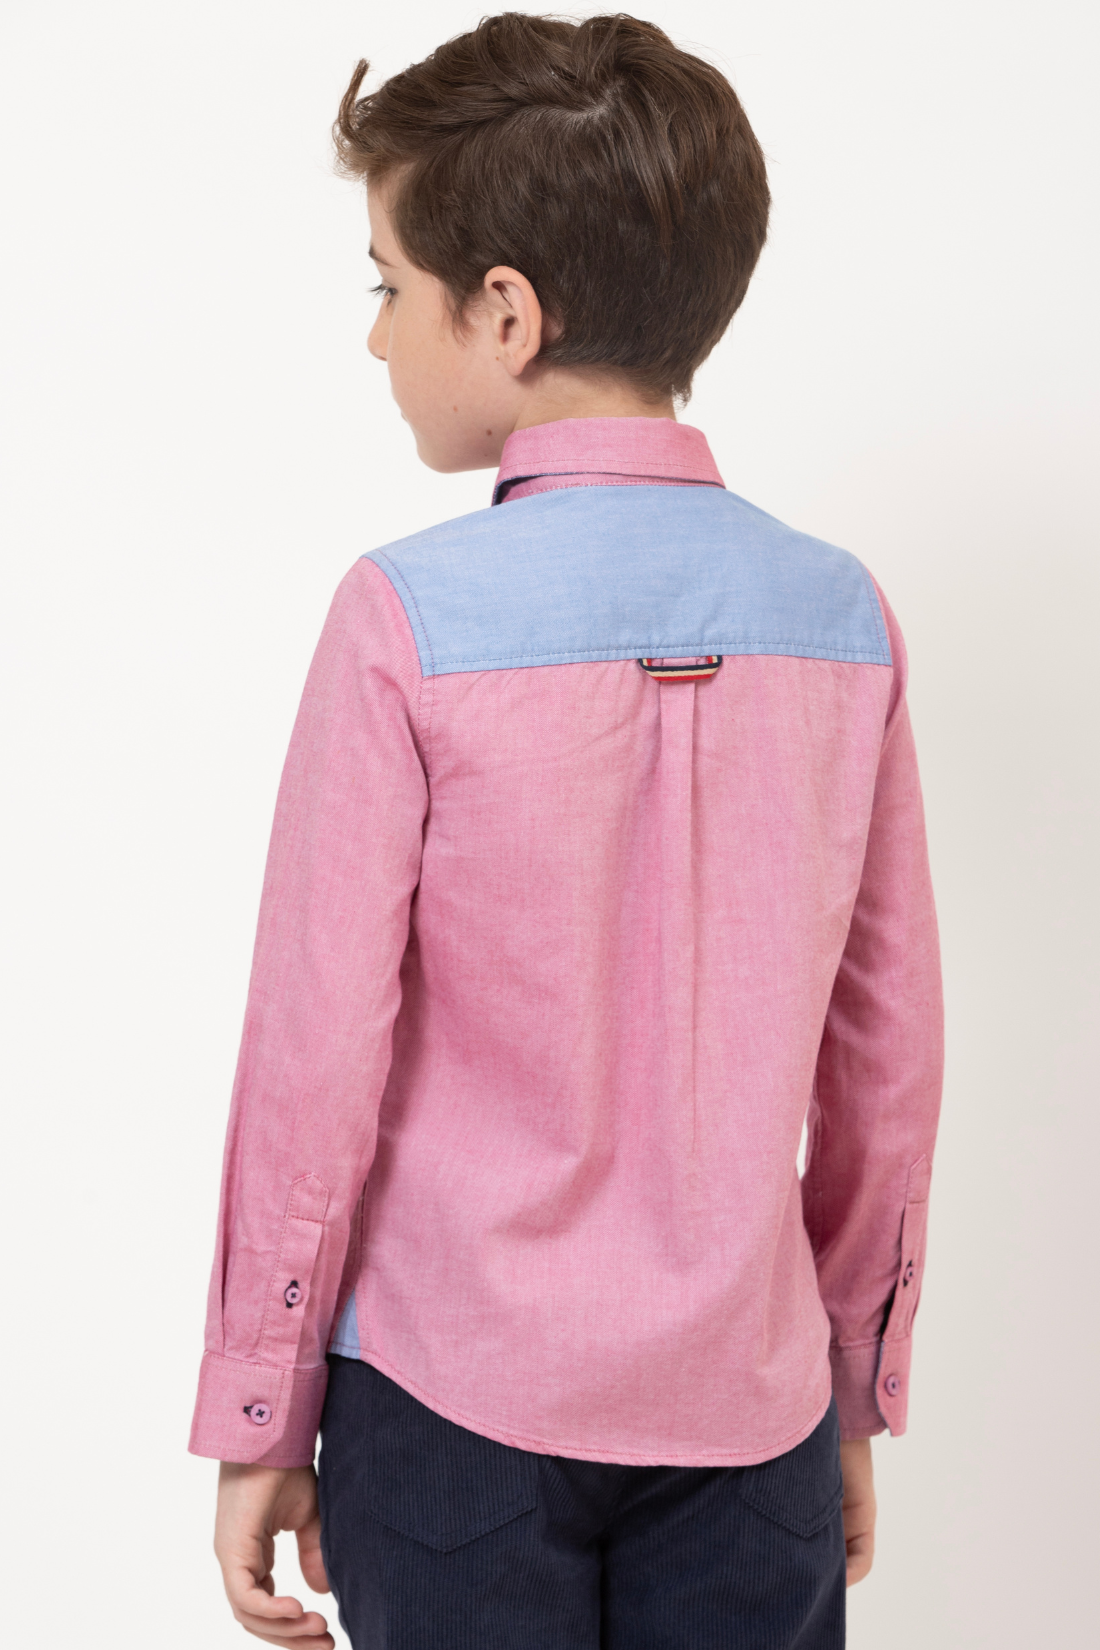 One Friday Varsity Chic Bold Red Shirt with Blue Shoulder Patches for Boys